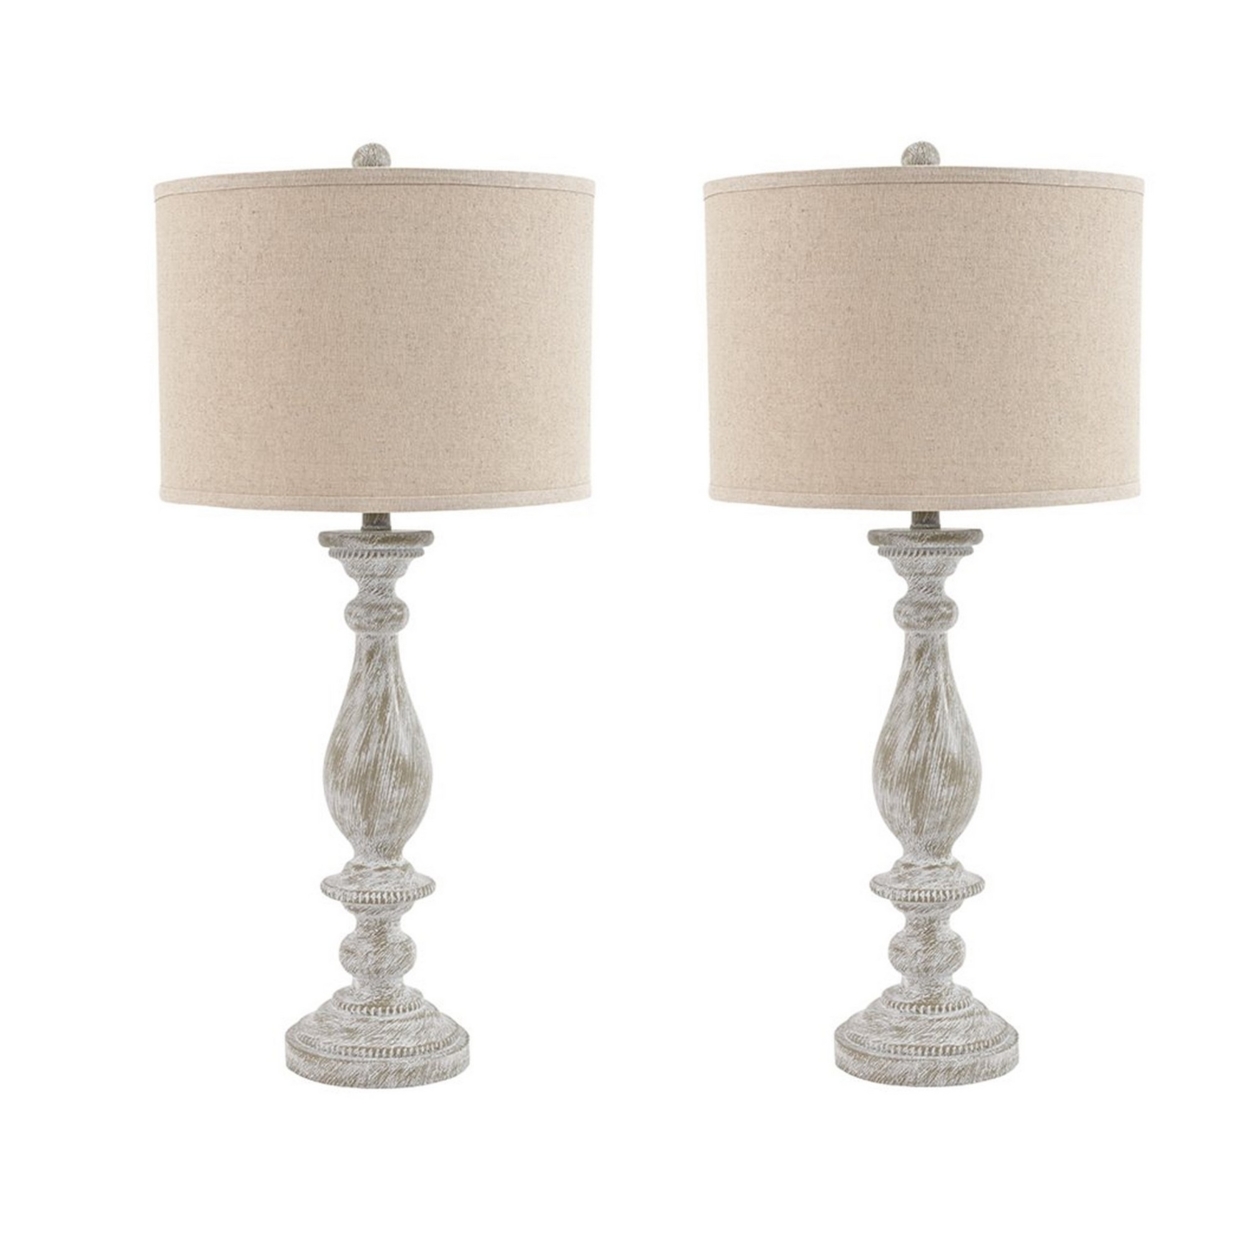 Drum Shade Table Lamp With Pedestal Base, Set Of 2, Beige And Off White- Saltoro Sherpi